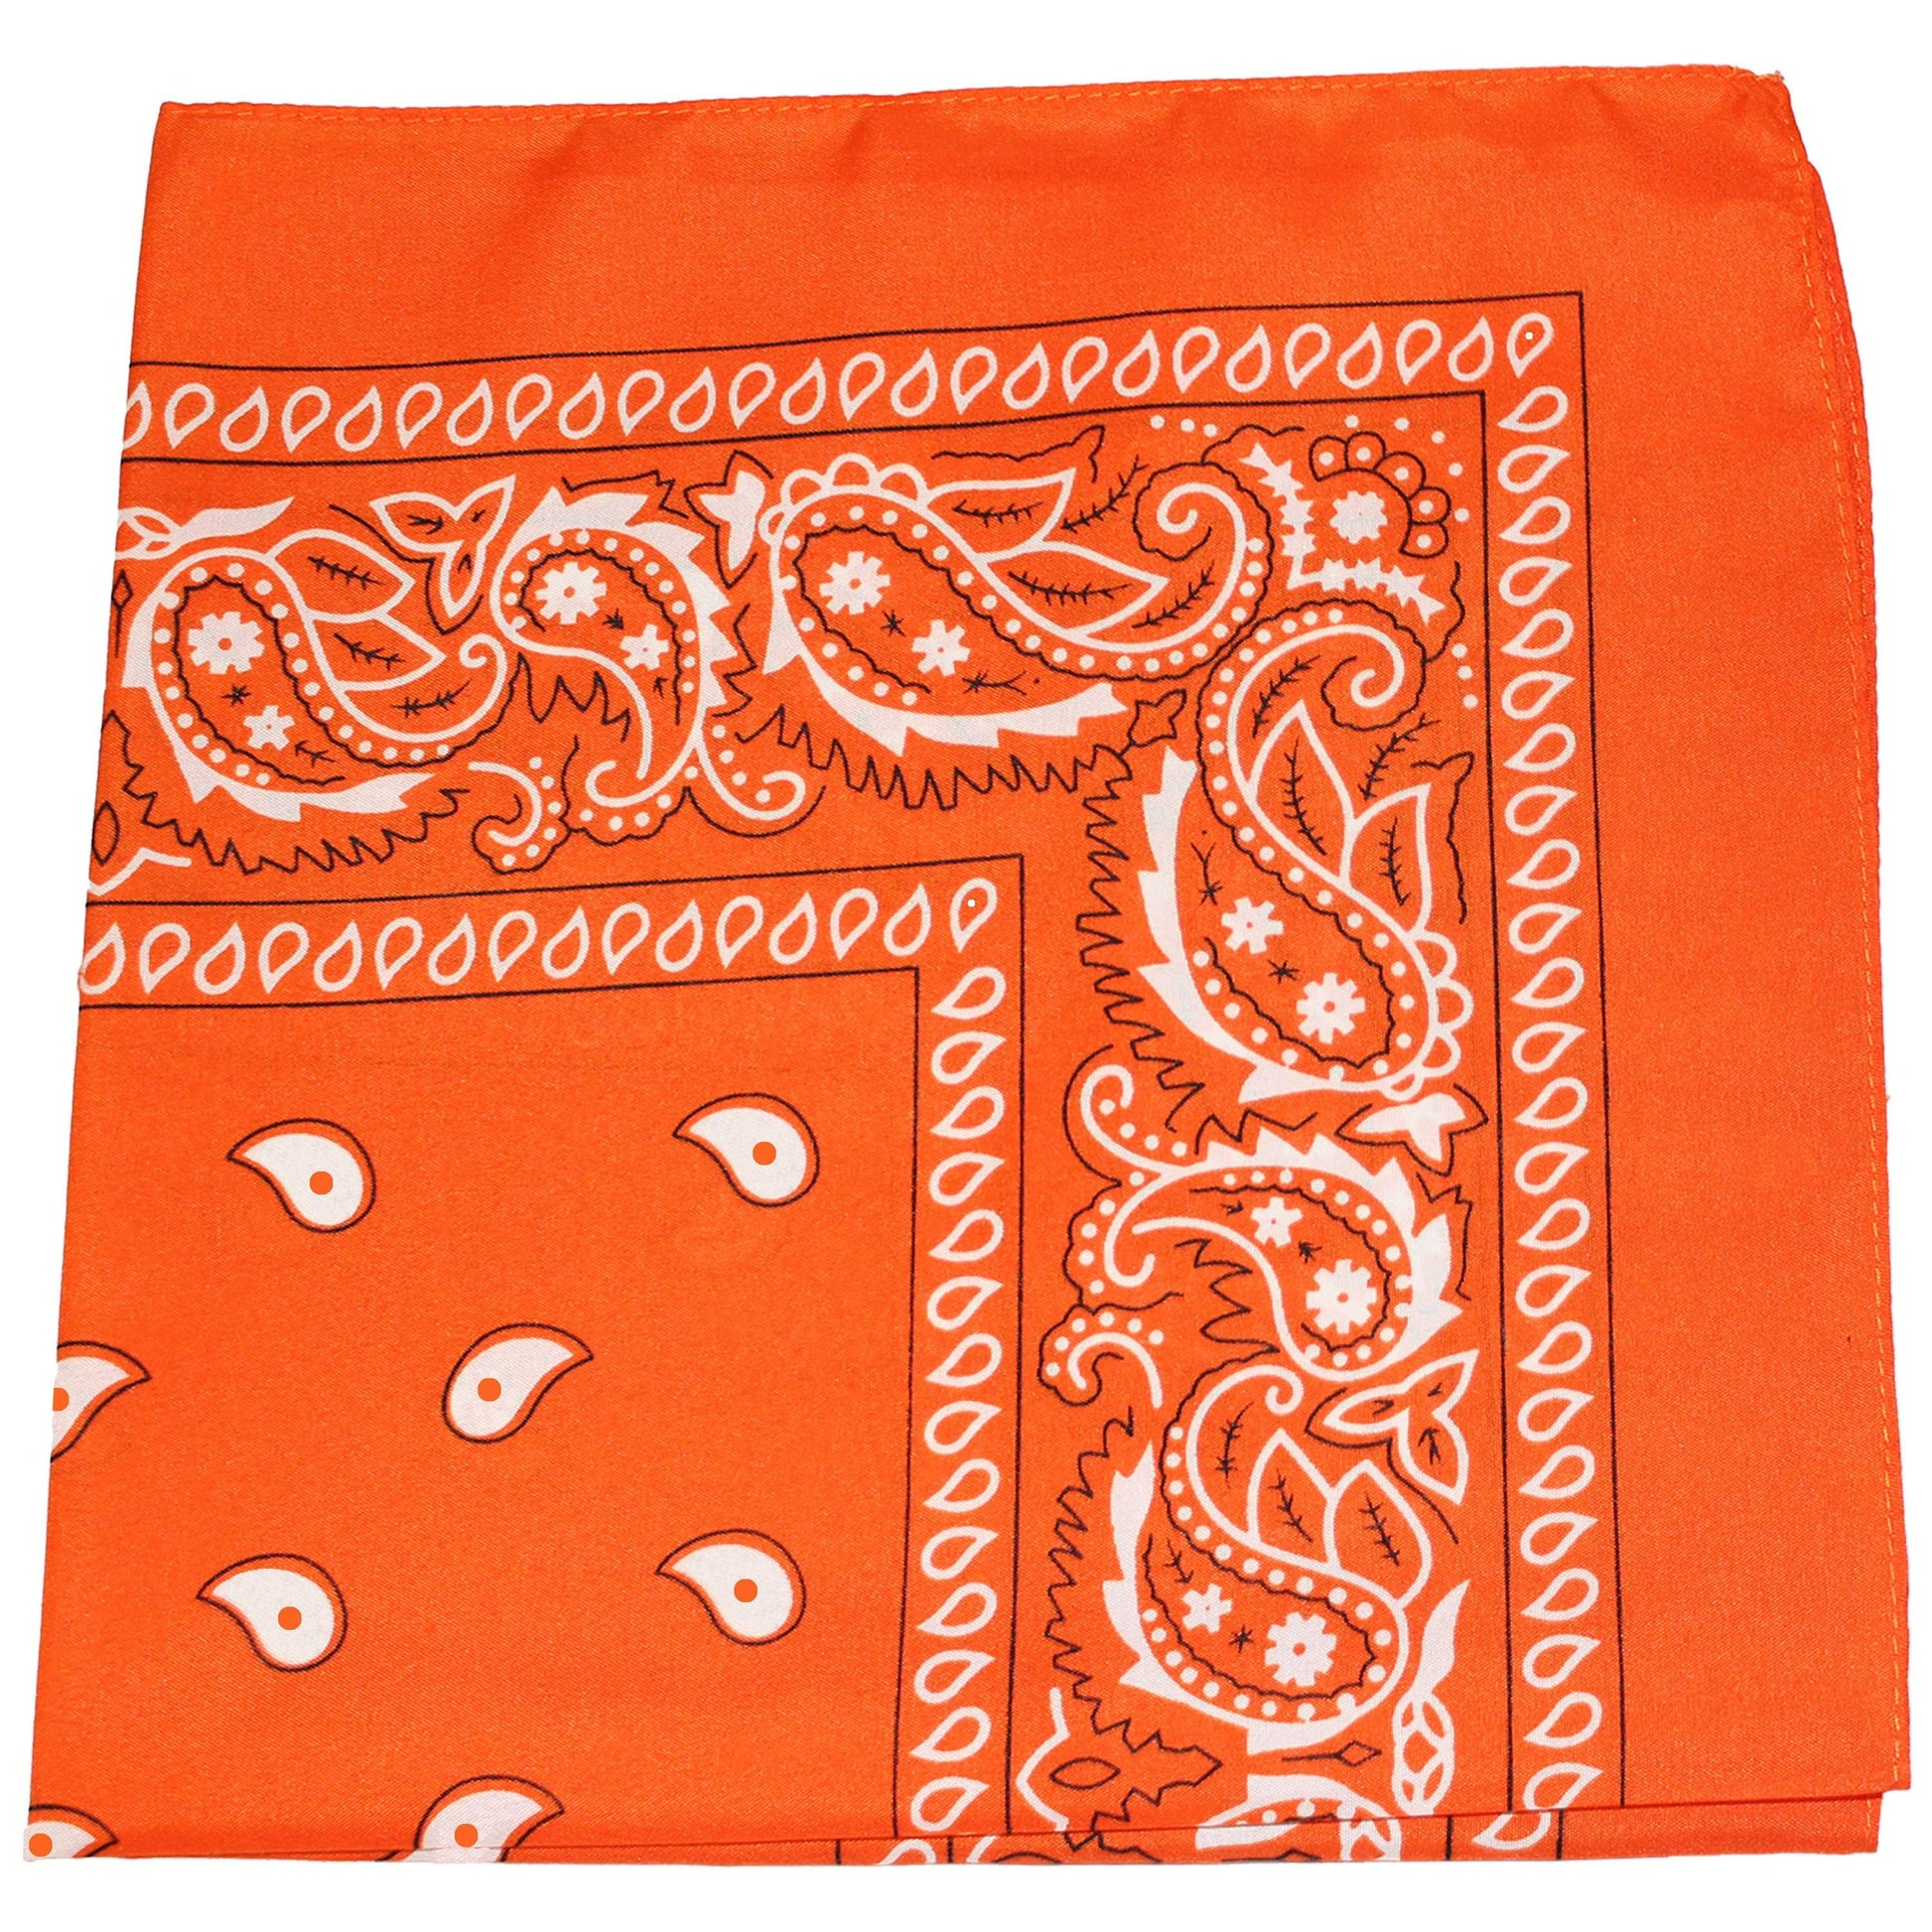 Pack of 6 Paisley Cotton Bandanas Novelty Headwraps - 22 inches